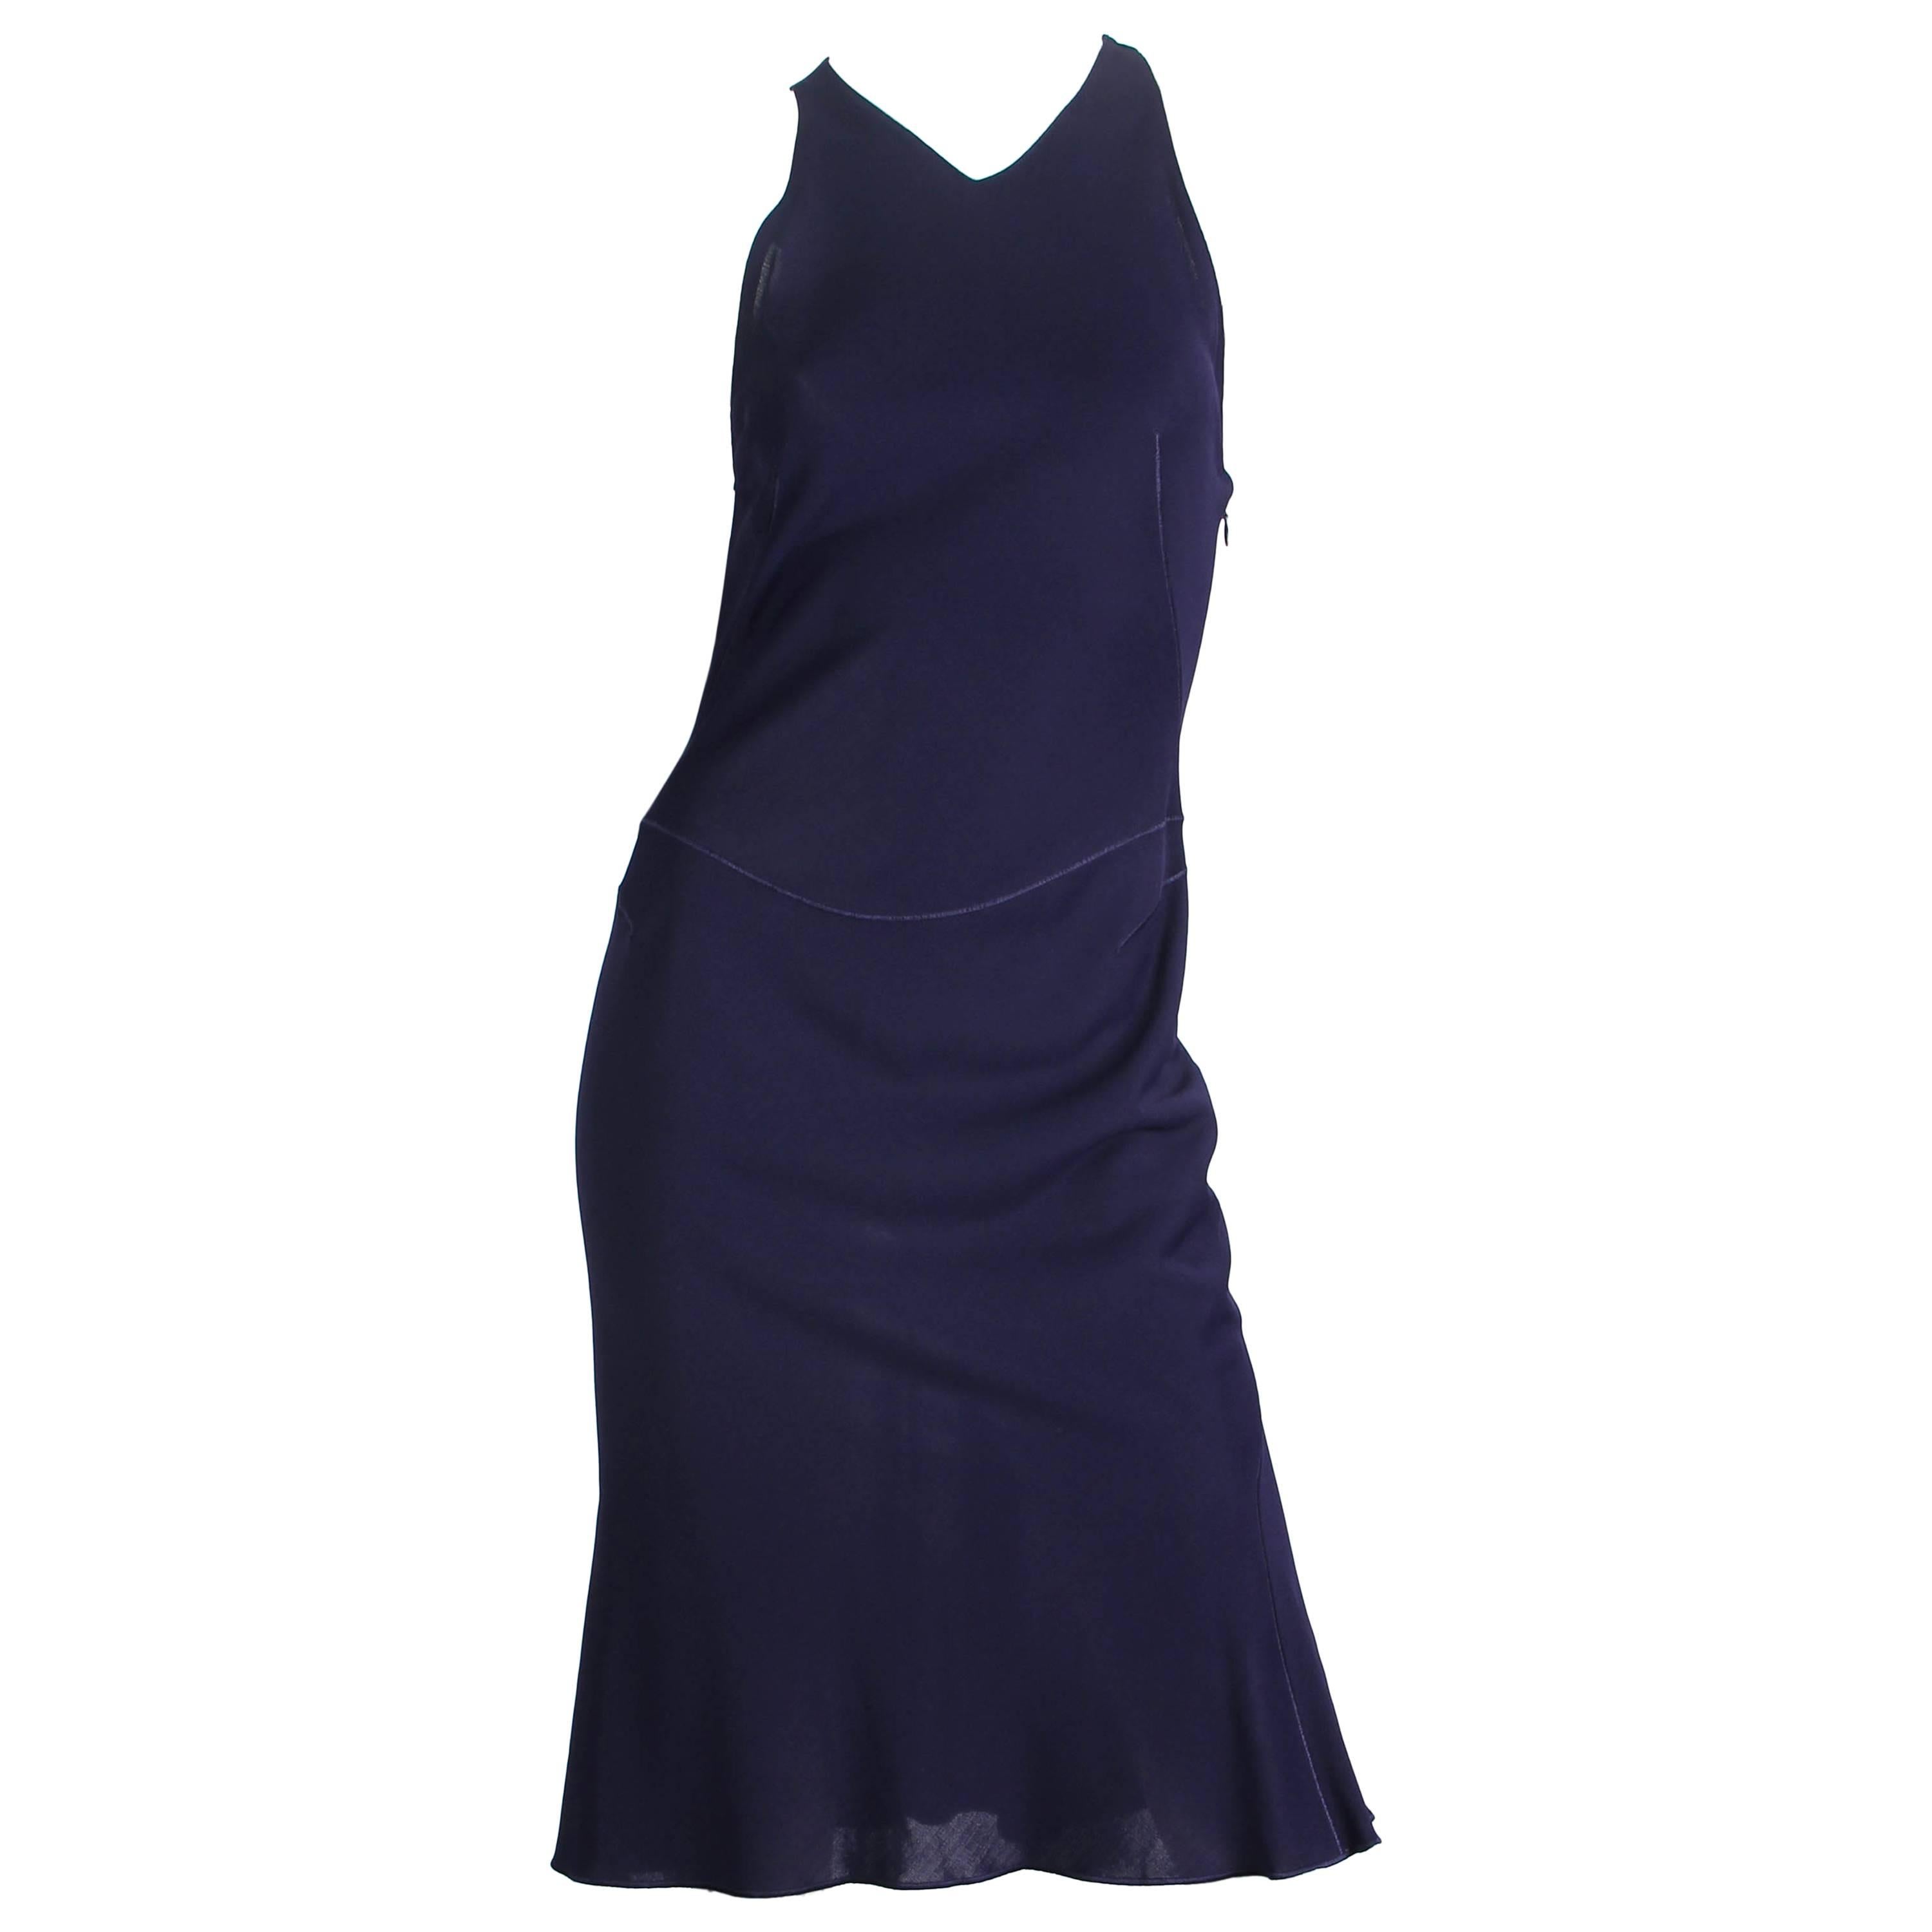 1980S AZZEDINE ALAIA Navy Blue Rayon Jersey Body-Con Cocktail Dress For Sale